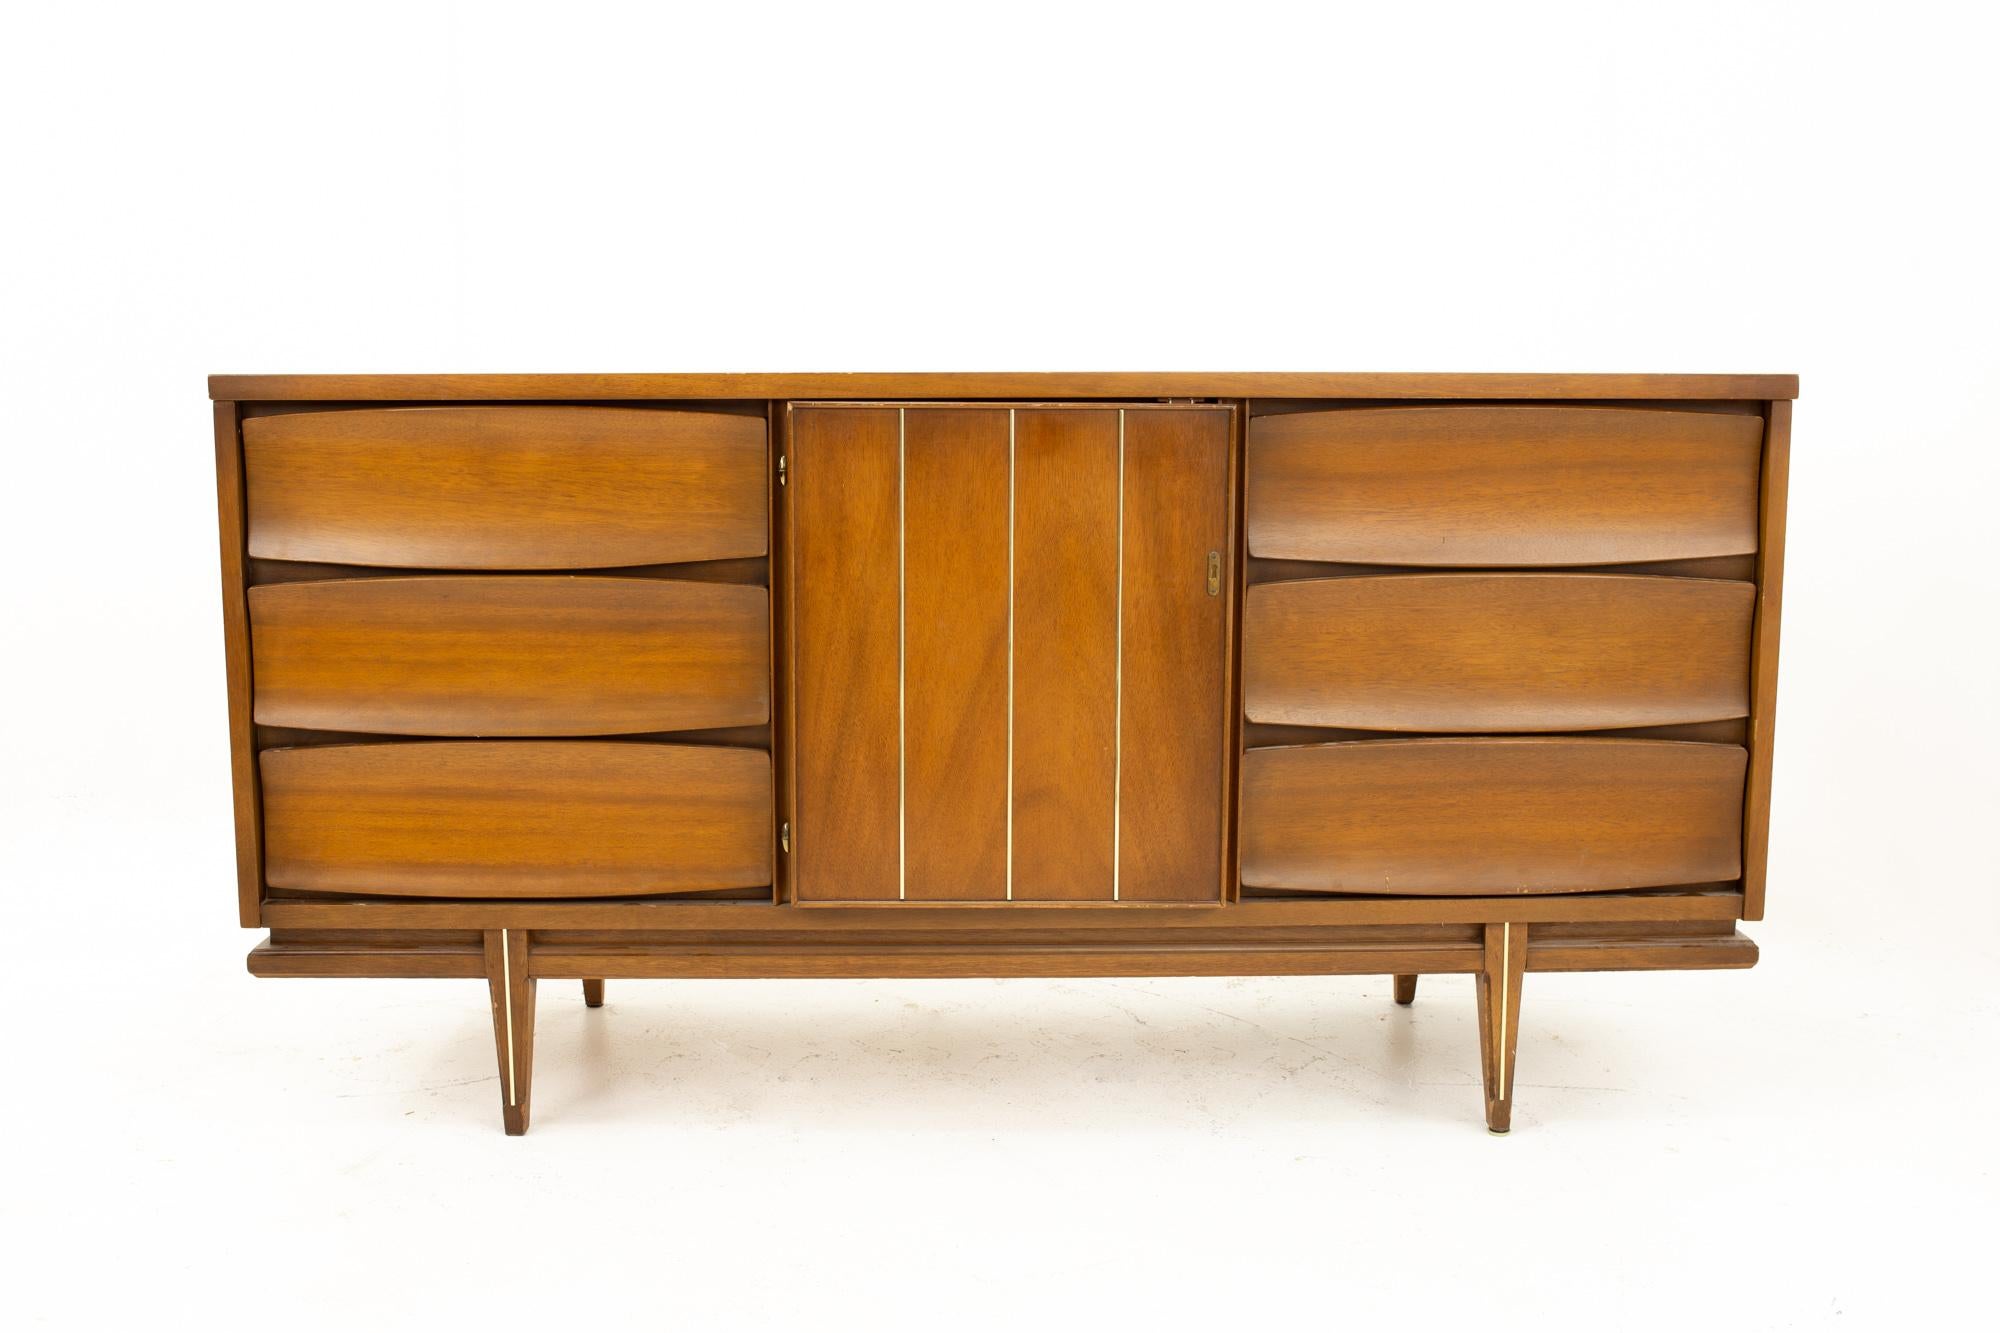 United style Mid Century 9-drawer walnut dresser
Dresser measures: 62 wide x 19 deep x 31 high

This price includes getting this piece in what we call restored vintage condition. That means the piece is permanently fixed upon purchase so it’s free